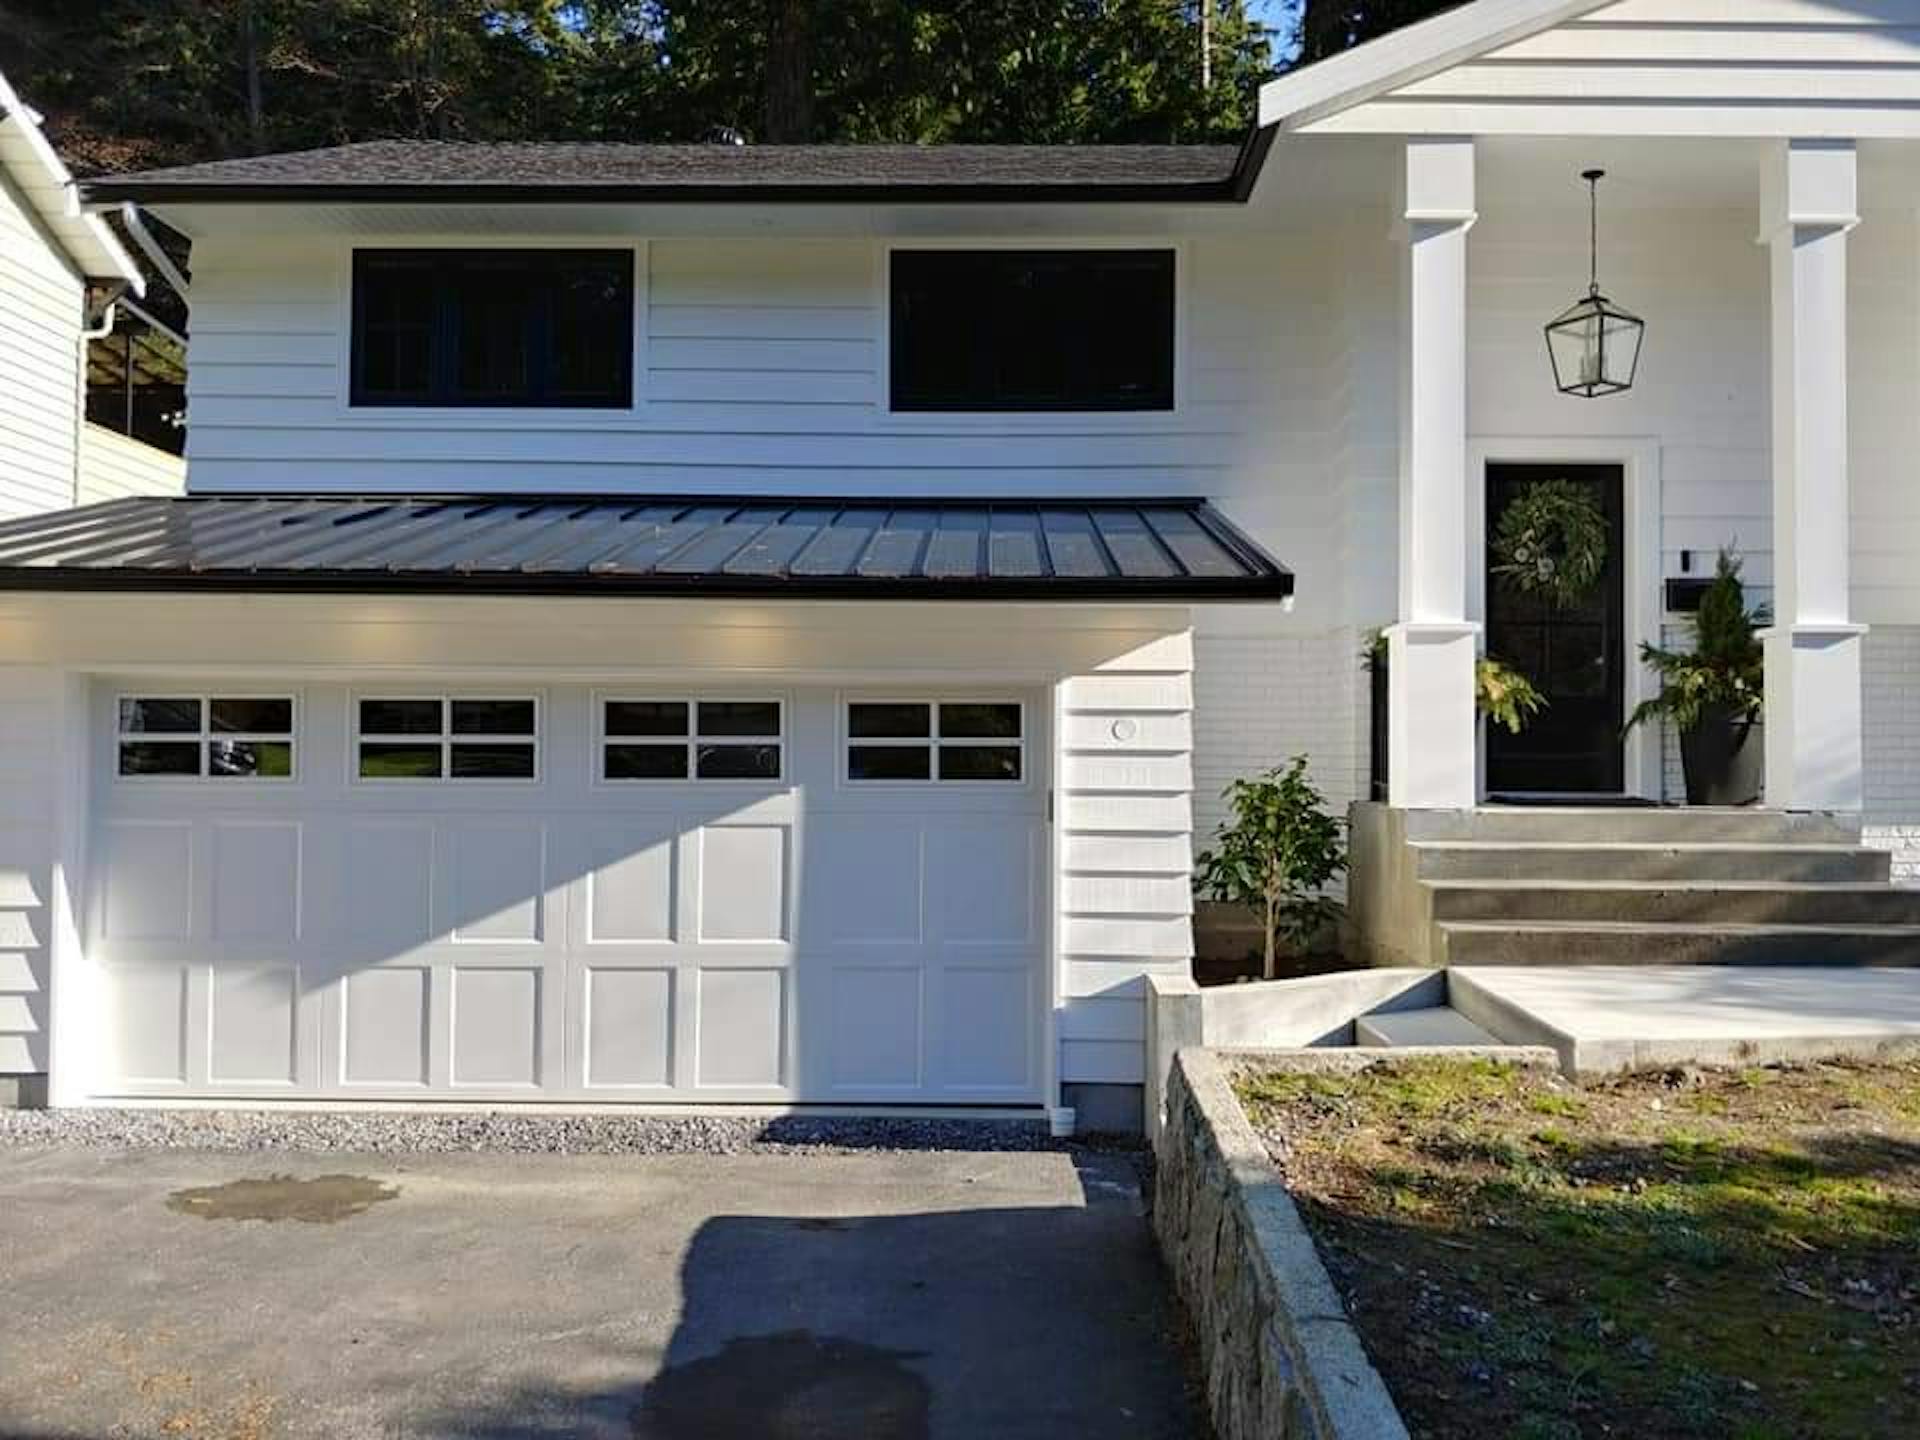 White paneled garage door with glass at top